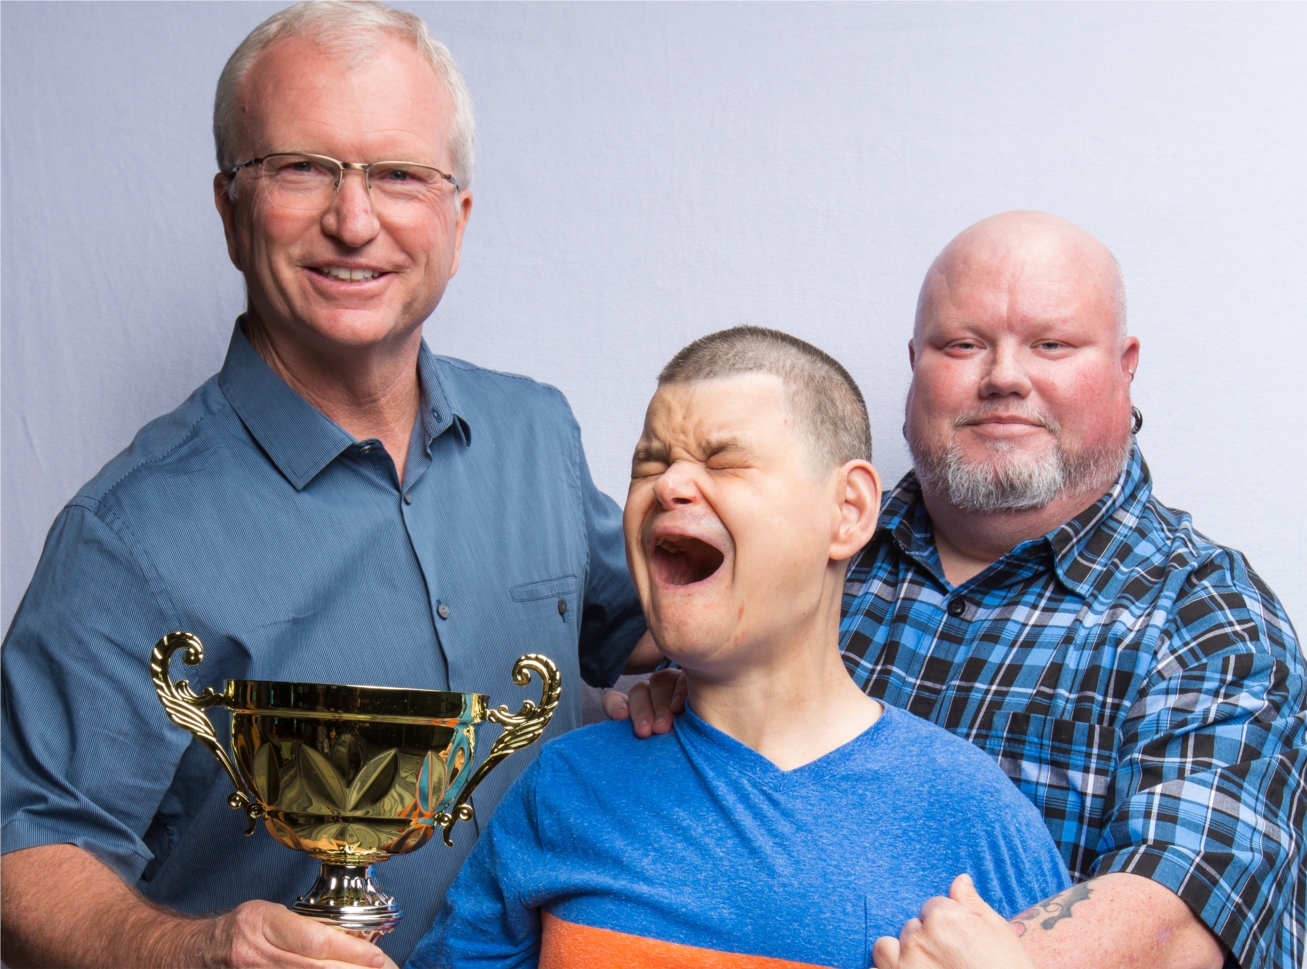 Brad, HGH Resident, happily receives the 2019 Client of the Year Award. At his sides are donor, Dave Walker (left) of Avista Technologies and Brad's caregiver and buddy, Derek.